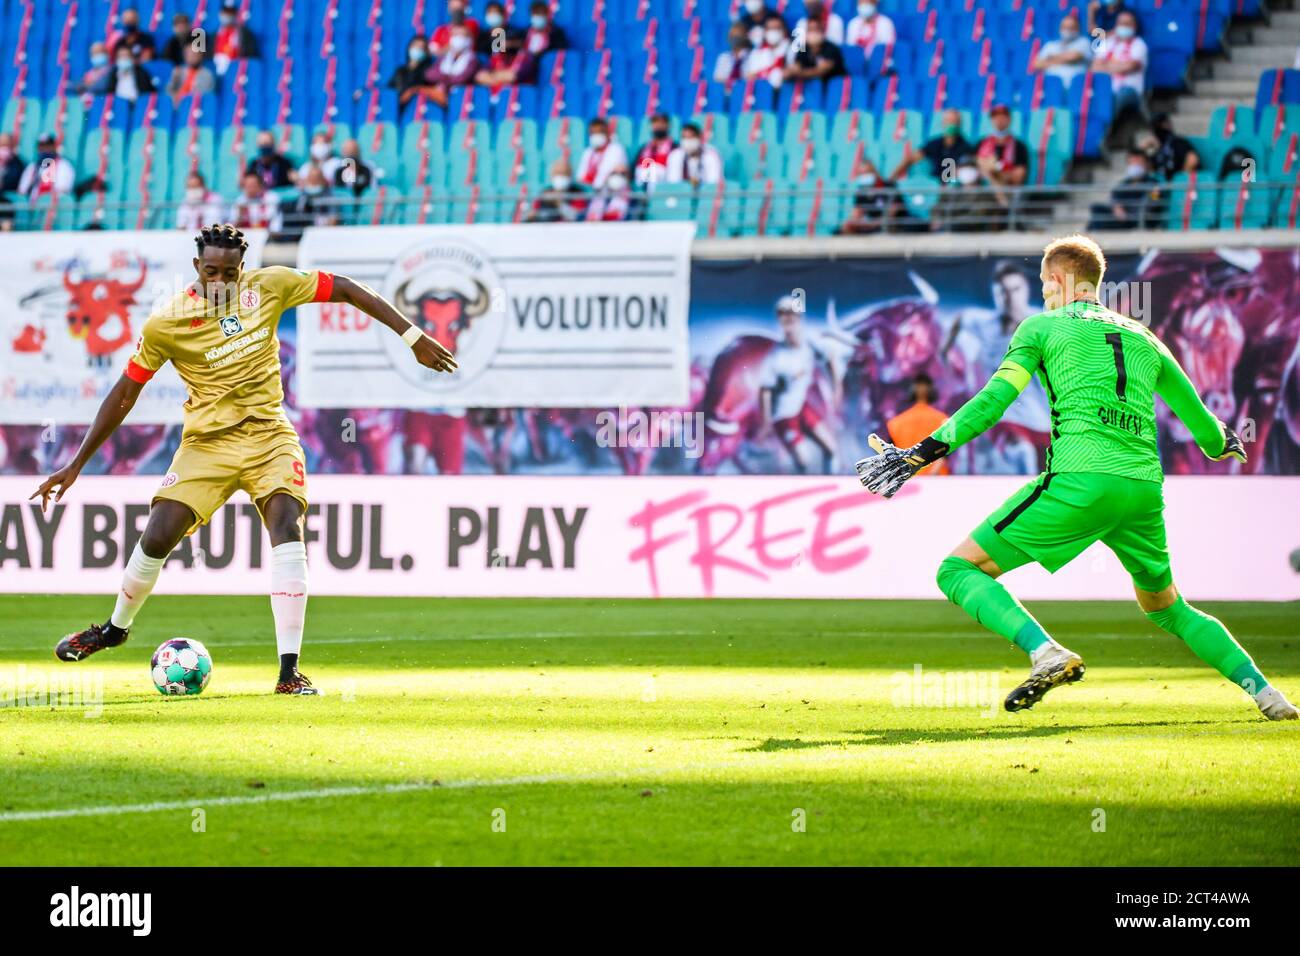 Leipzig, Germany. 20th Sep, 2020. Jean-Philippe Mateta (L) of Mainz takes a scoring shot during a German Bundesliga match between RB Leipzig and 1.FSV Mainz 05 in Leipzig, Germany, Sept. 20, 2020. Credit: Kevin Voigt/Xinhua/Alamy Live News Stock Photo